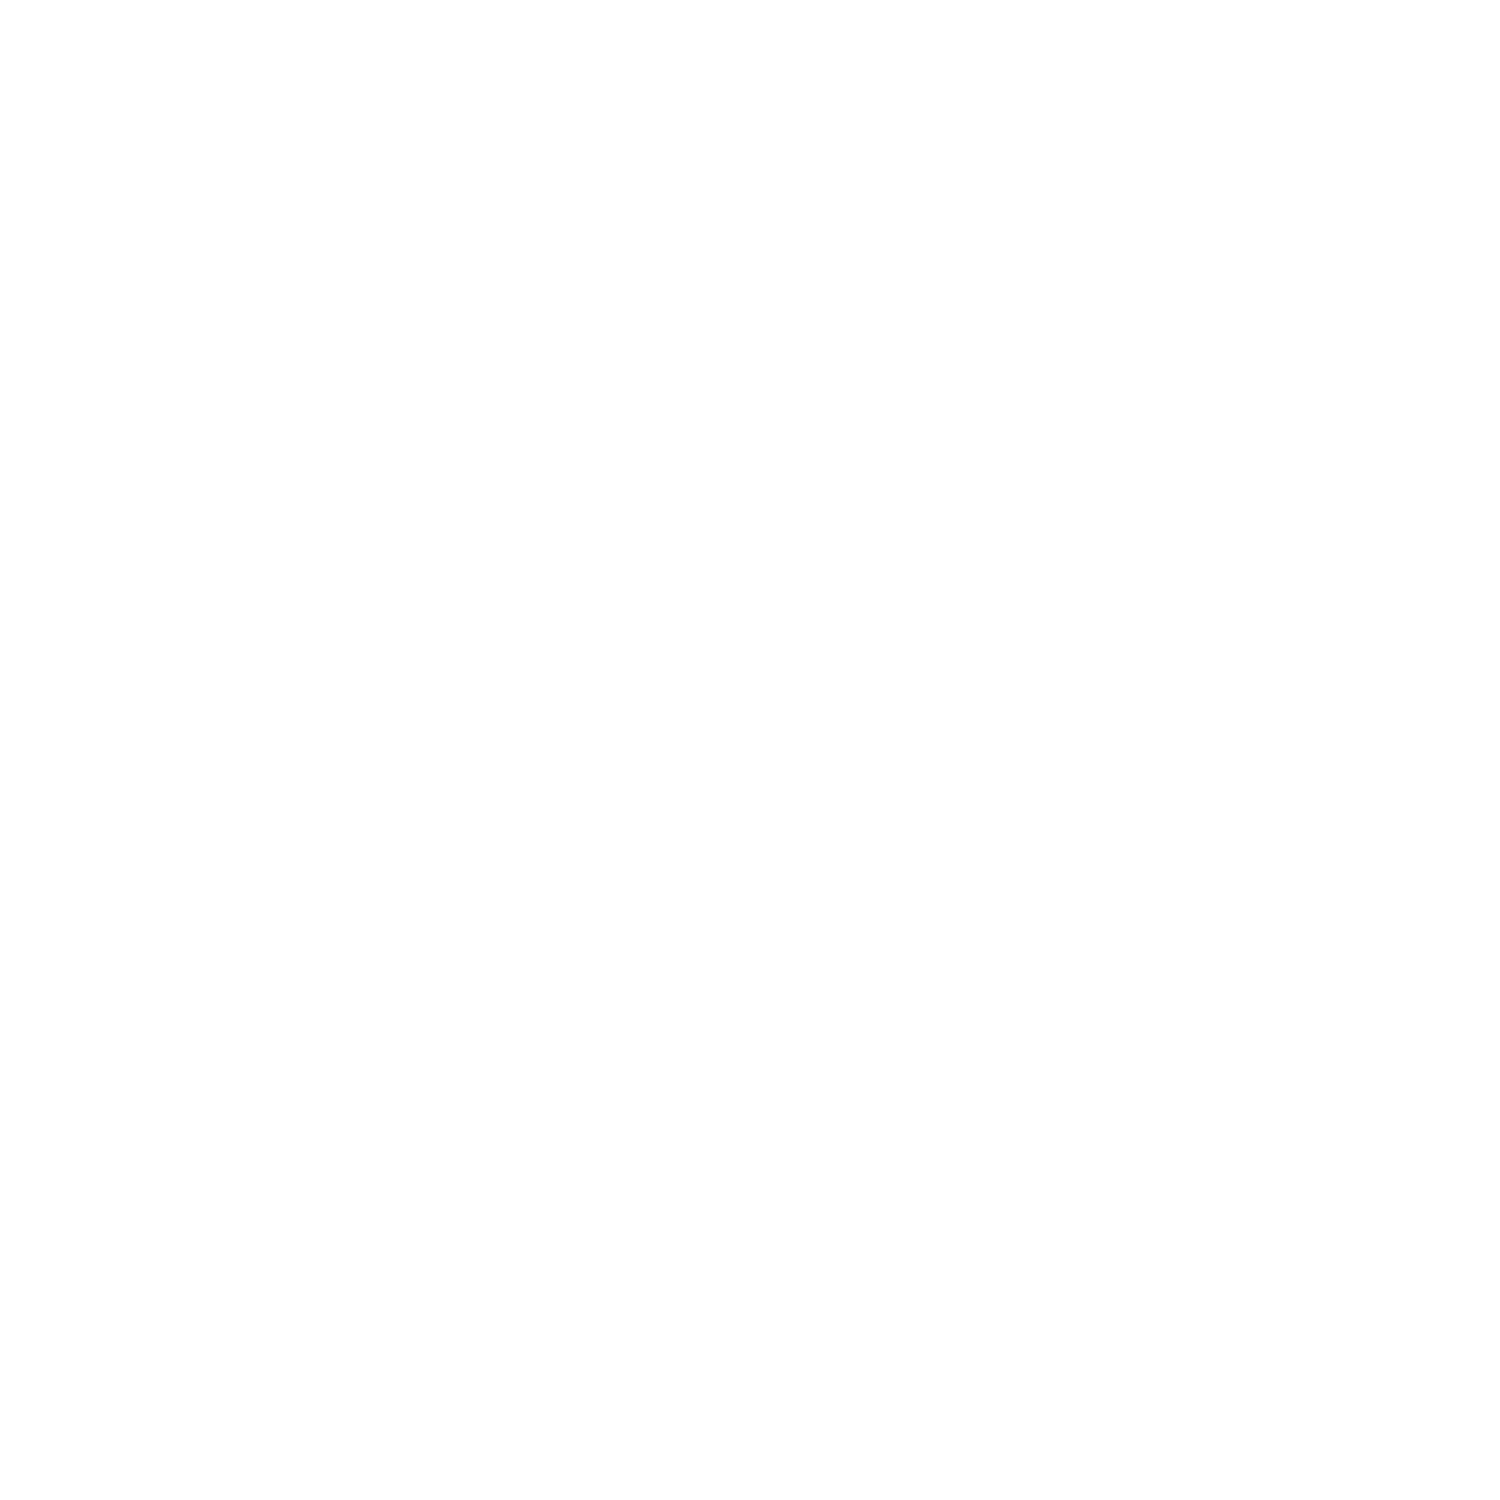 The Ylem Expedition Company